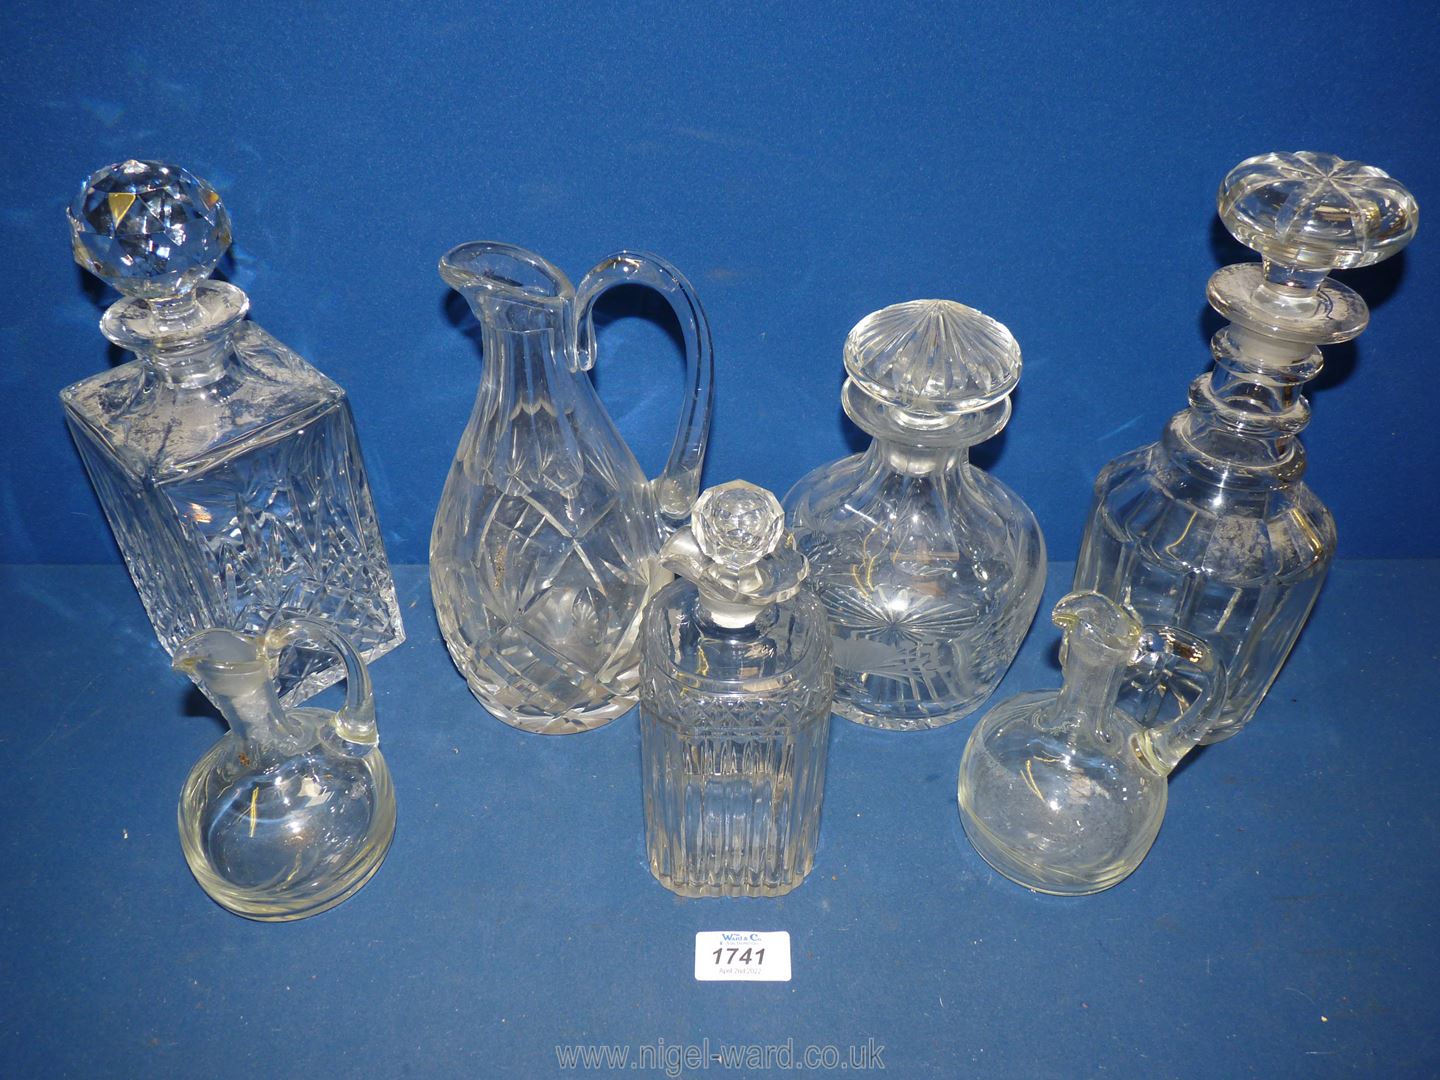 Four glass decanters and stoppers, a water jug and two small vinaigrette/ oil bottles. - Image 2 of 2